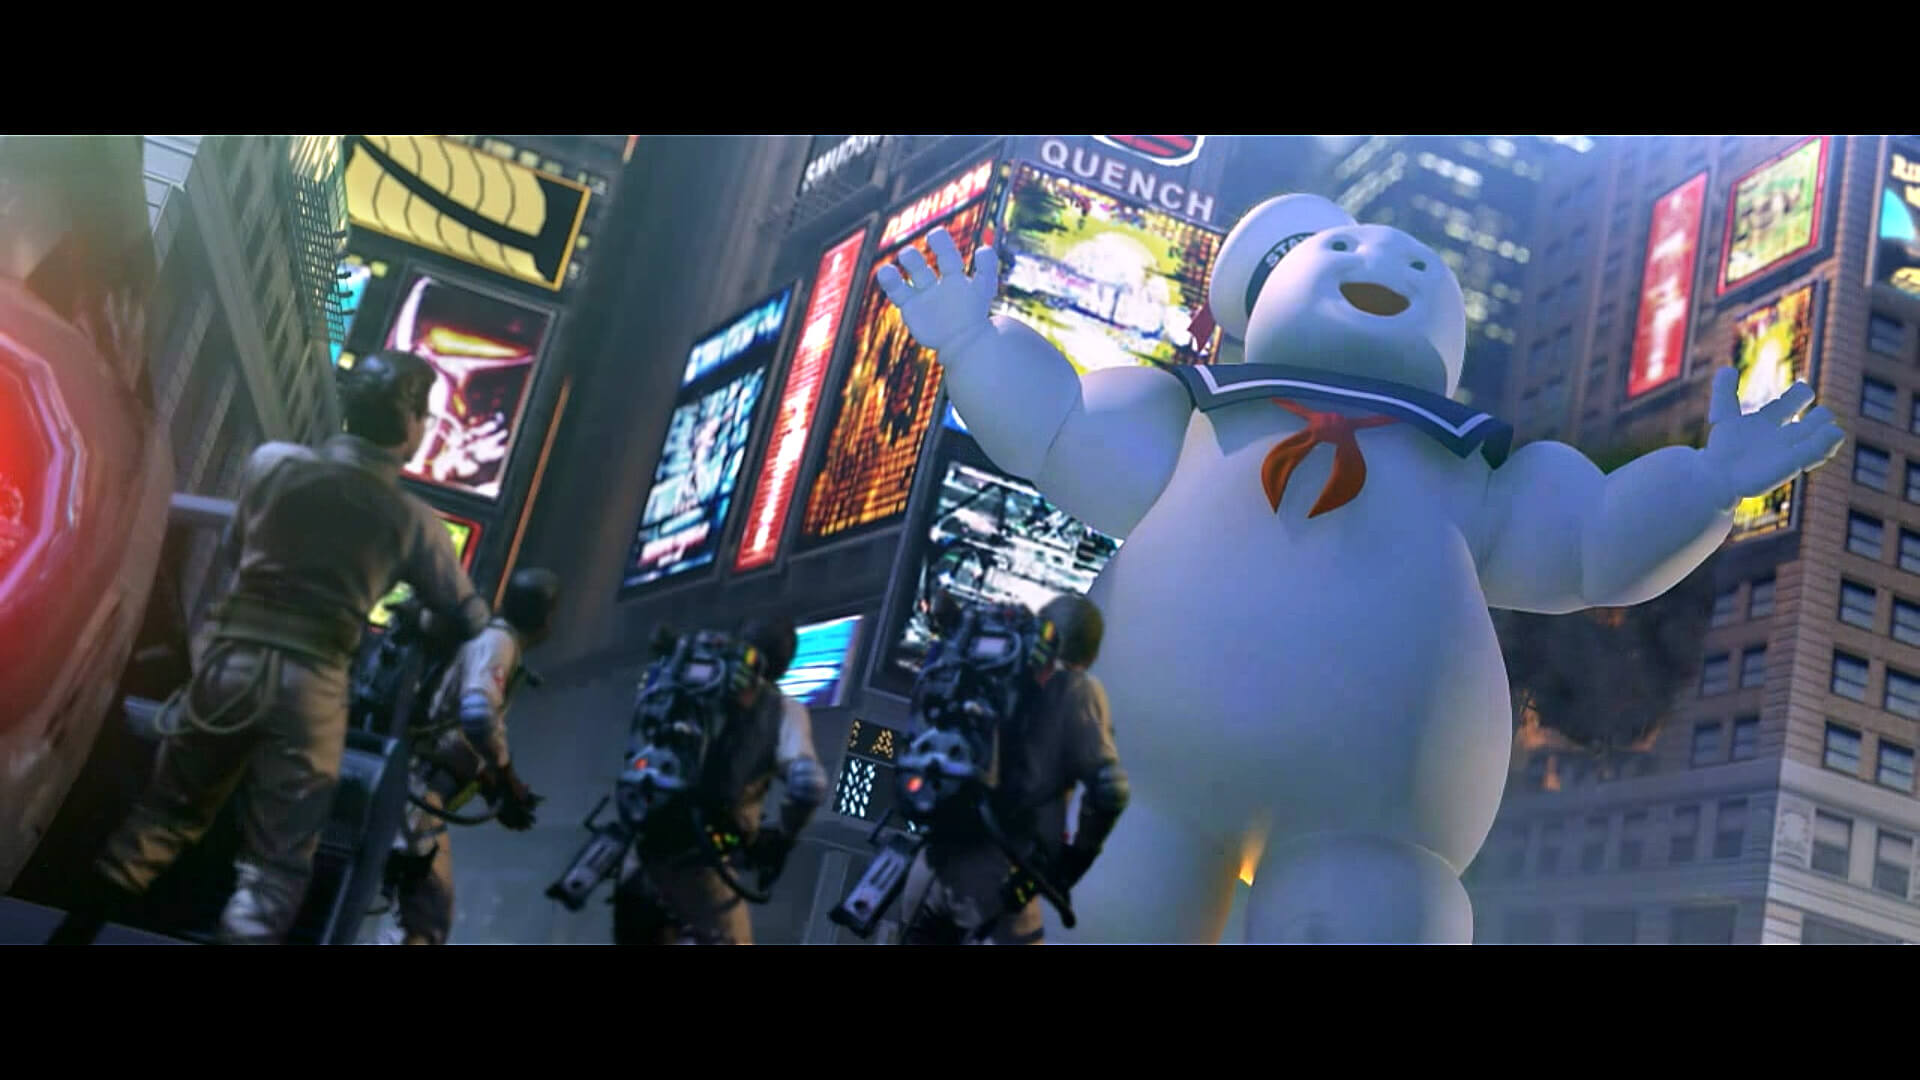 Diesel product ghostbusters the video game remastered home GBR StayPuft 1920x1080 95b3ed2e271c94ac62339646c8bf3ac4e8a8ee07